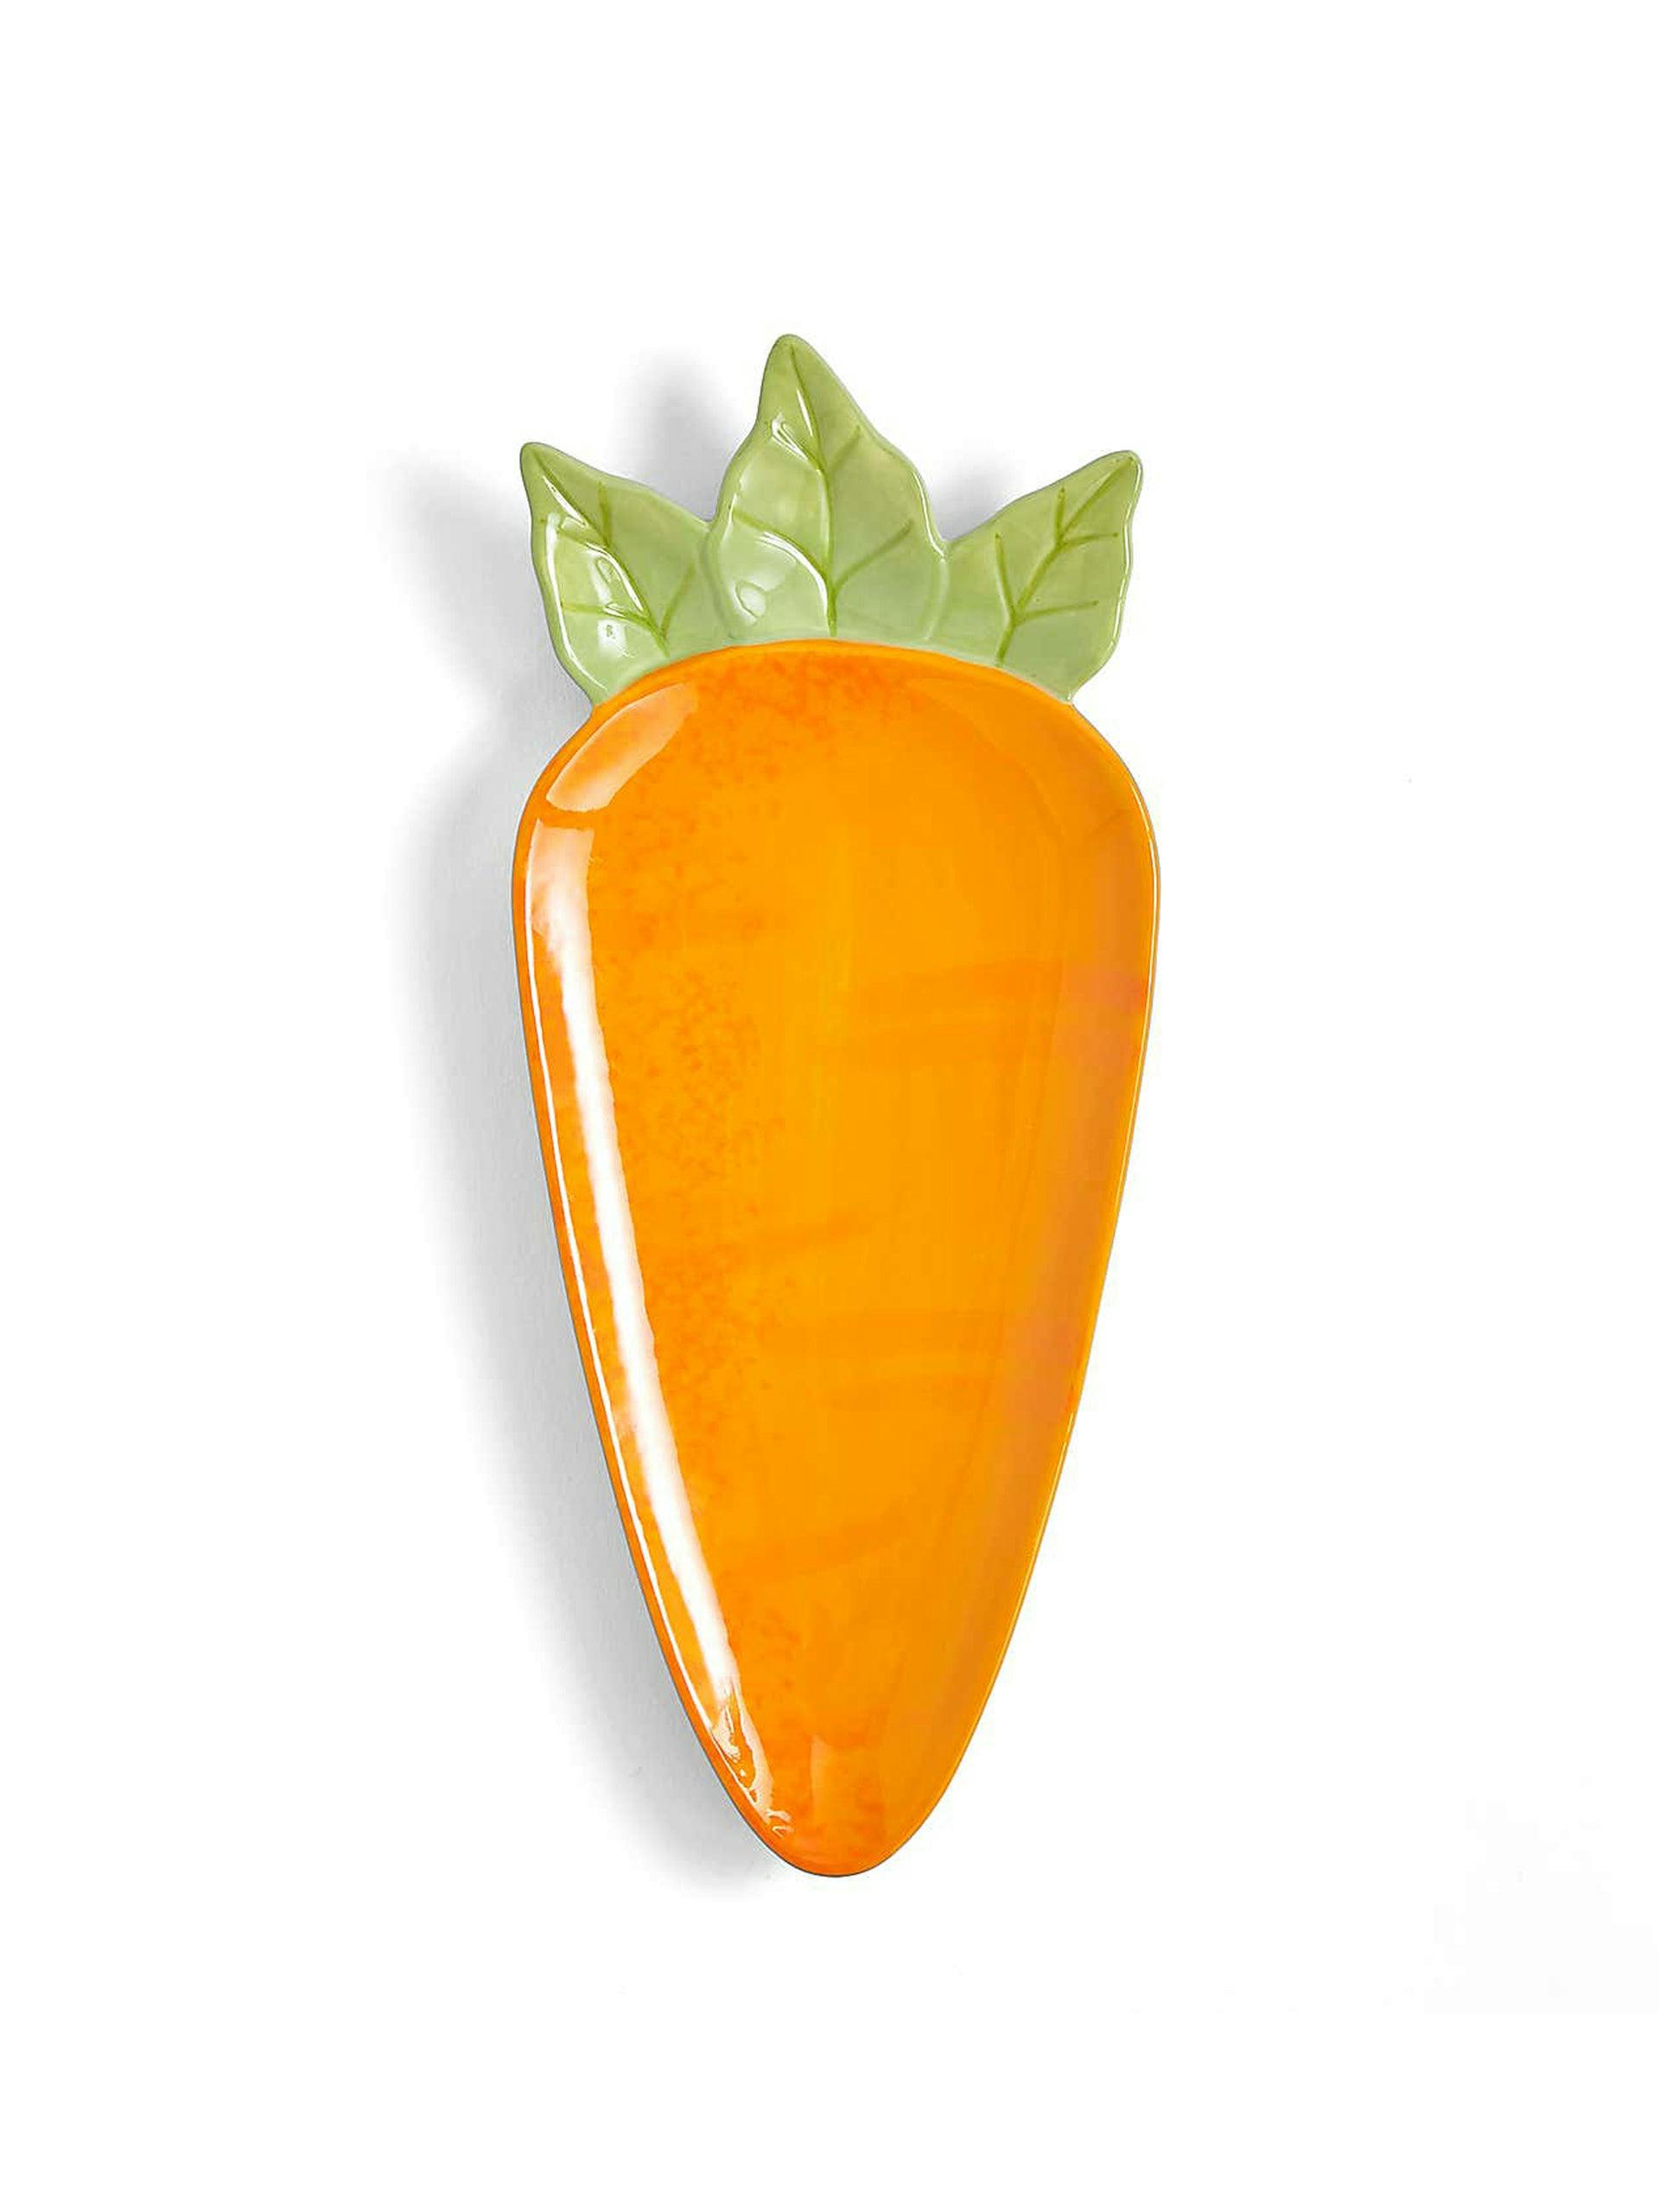 Carrot shaped plate